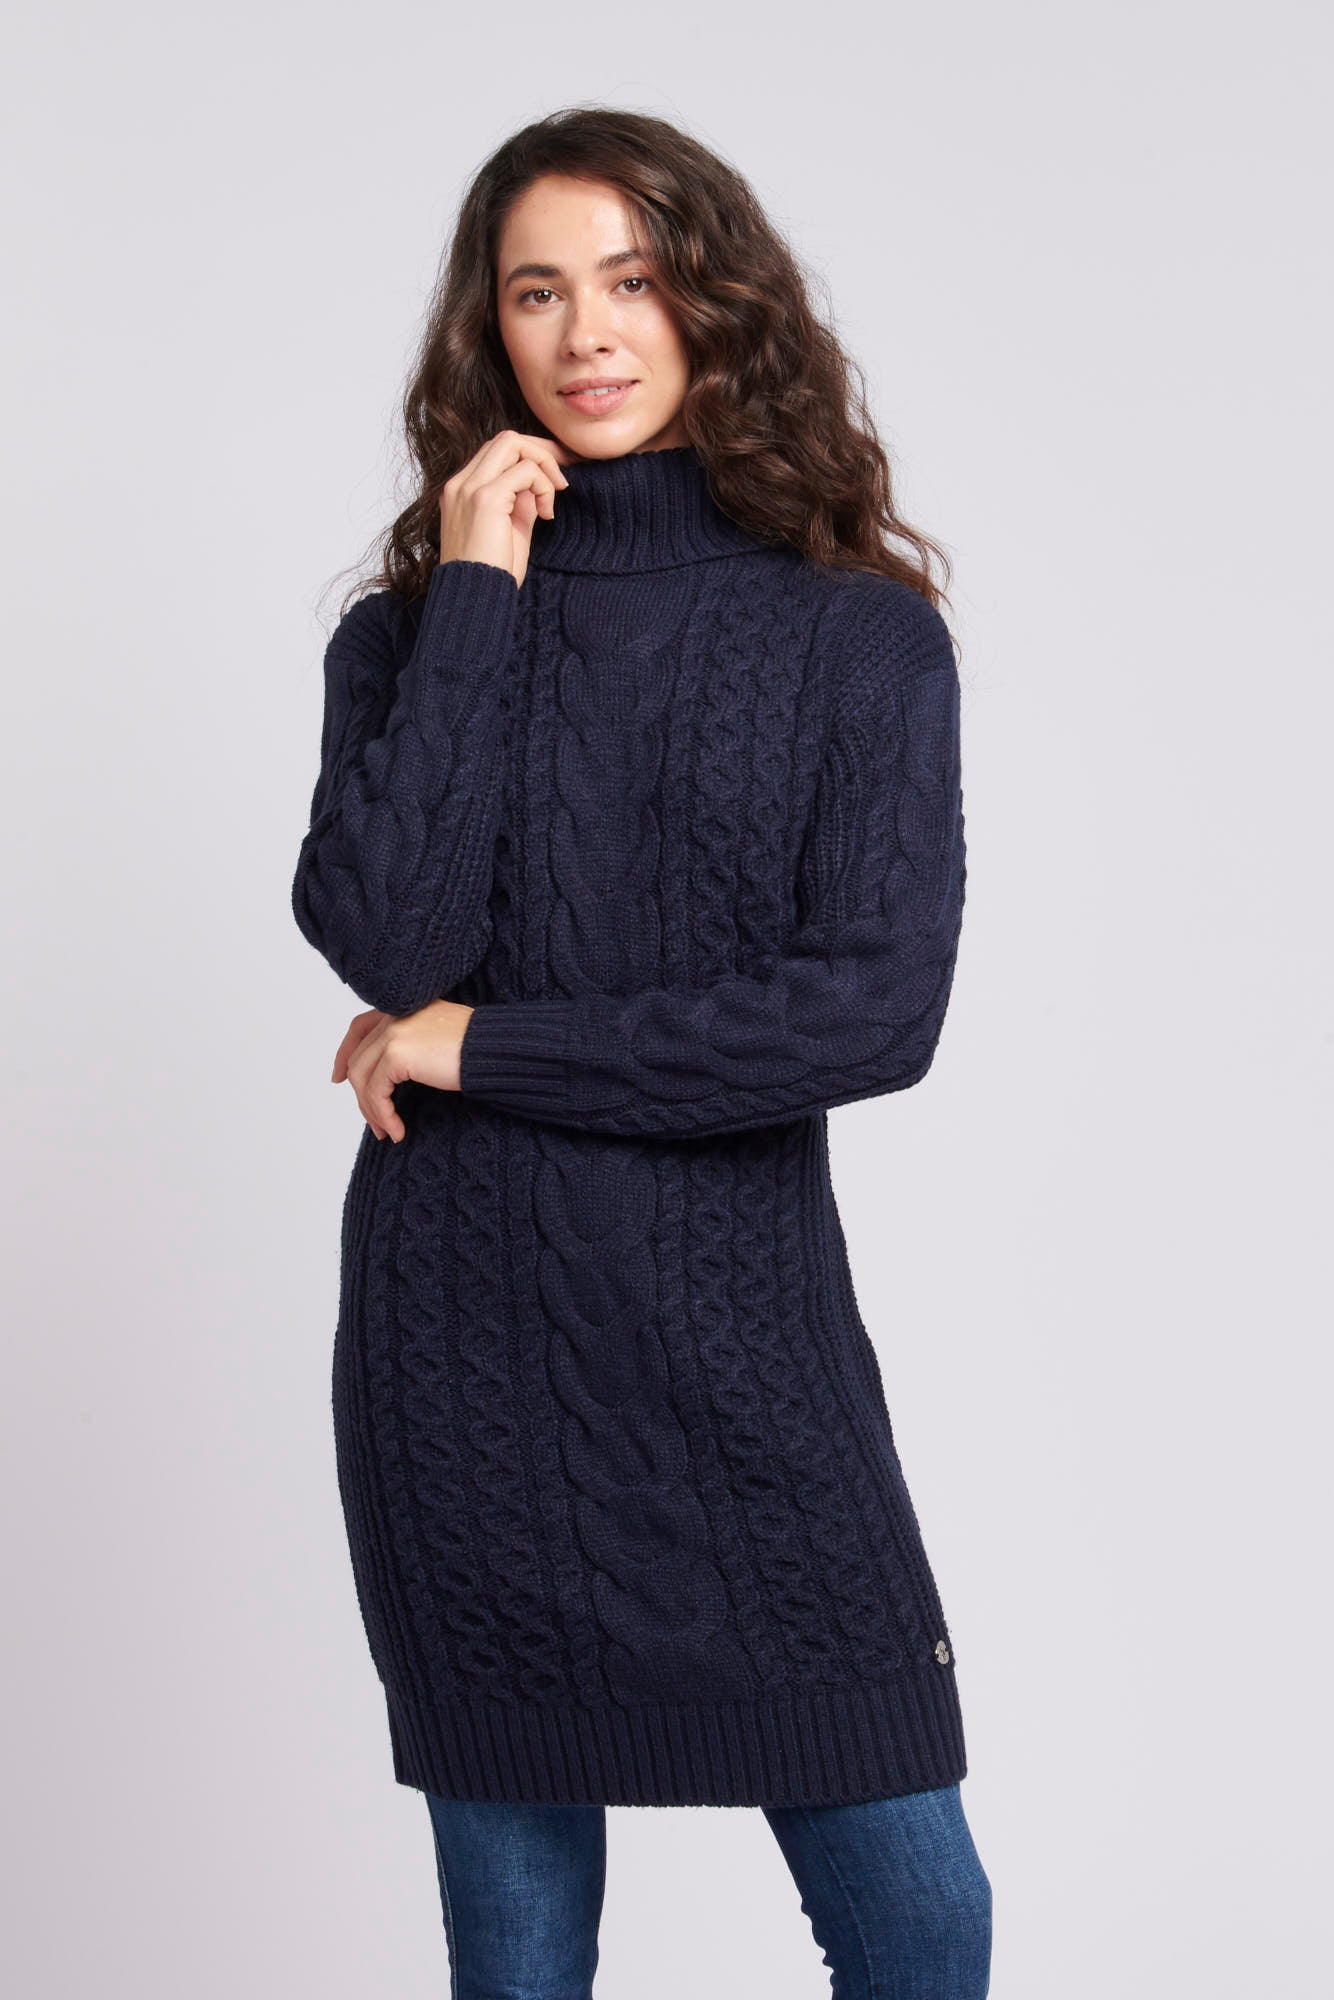 Womens Mixed Cable Knit Dress in Navy Blue